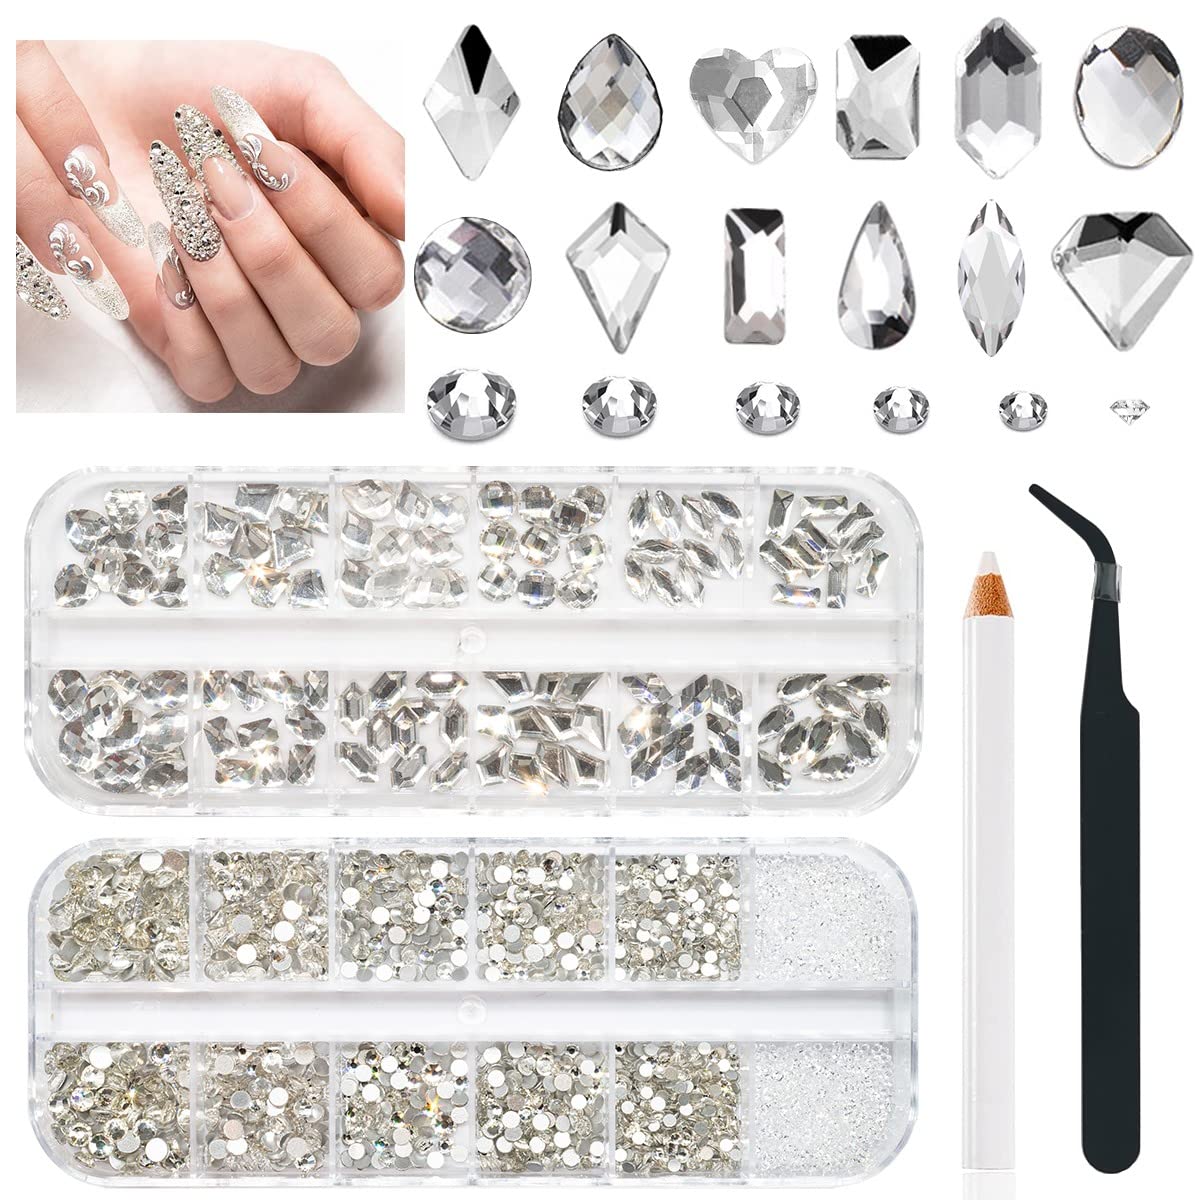 12 Grids White Rhinestones Nail Art Decoration Flat Back Crystal  Rhinestones Mixed Sizes DIY Glass Manicure Accessories Nail Supplies for  Salon Design